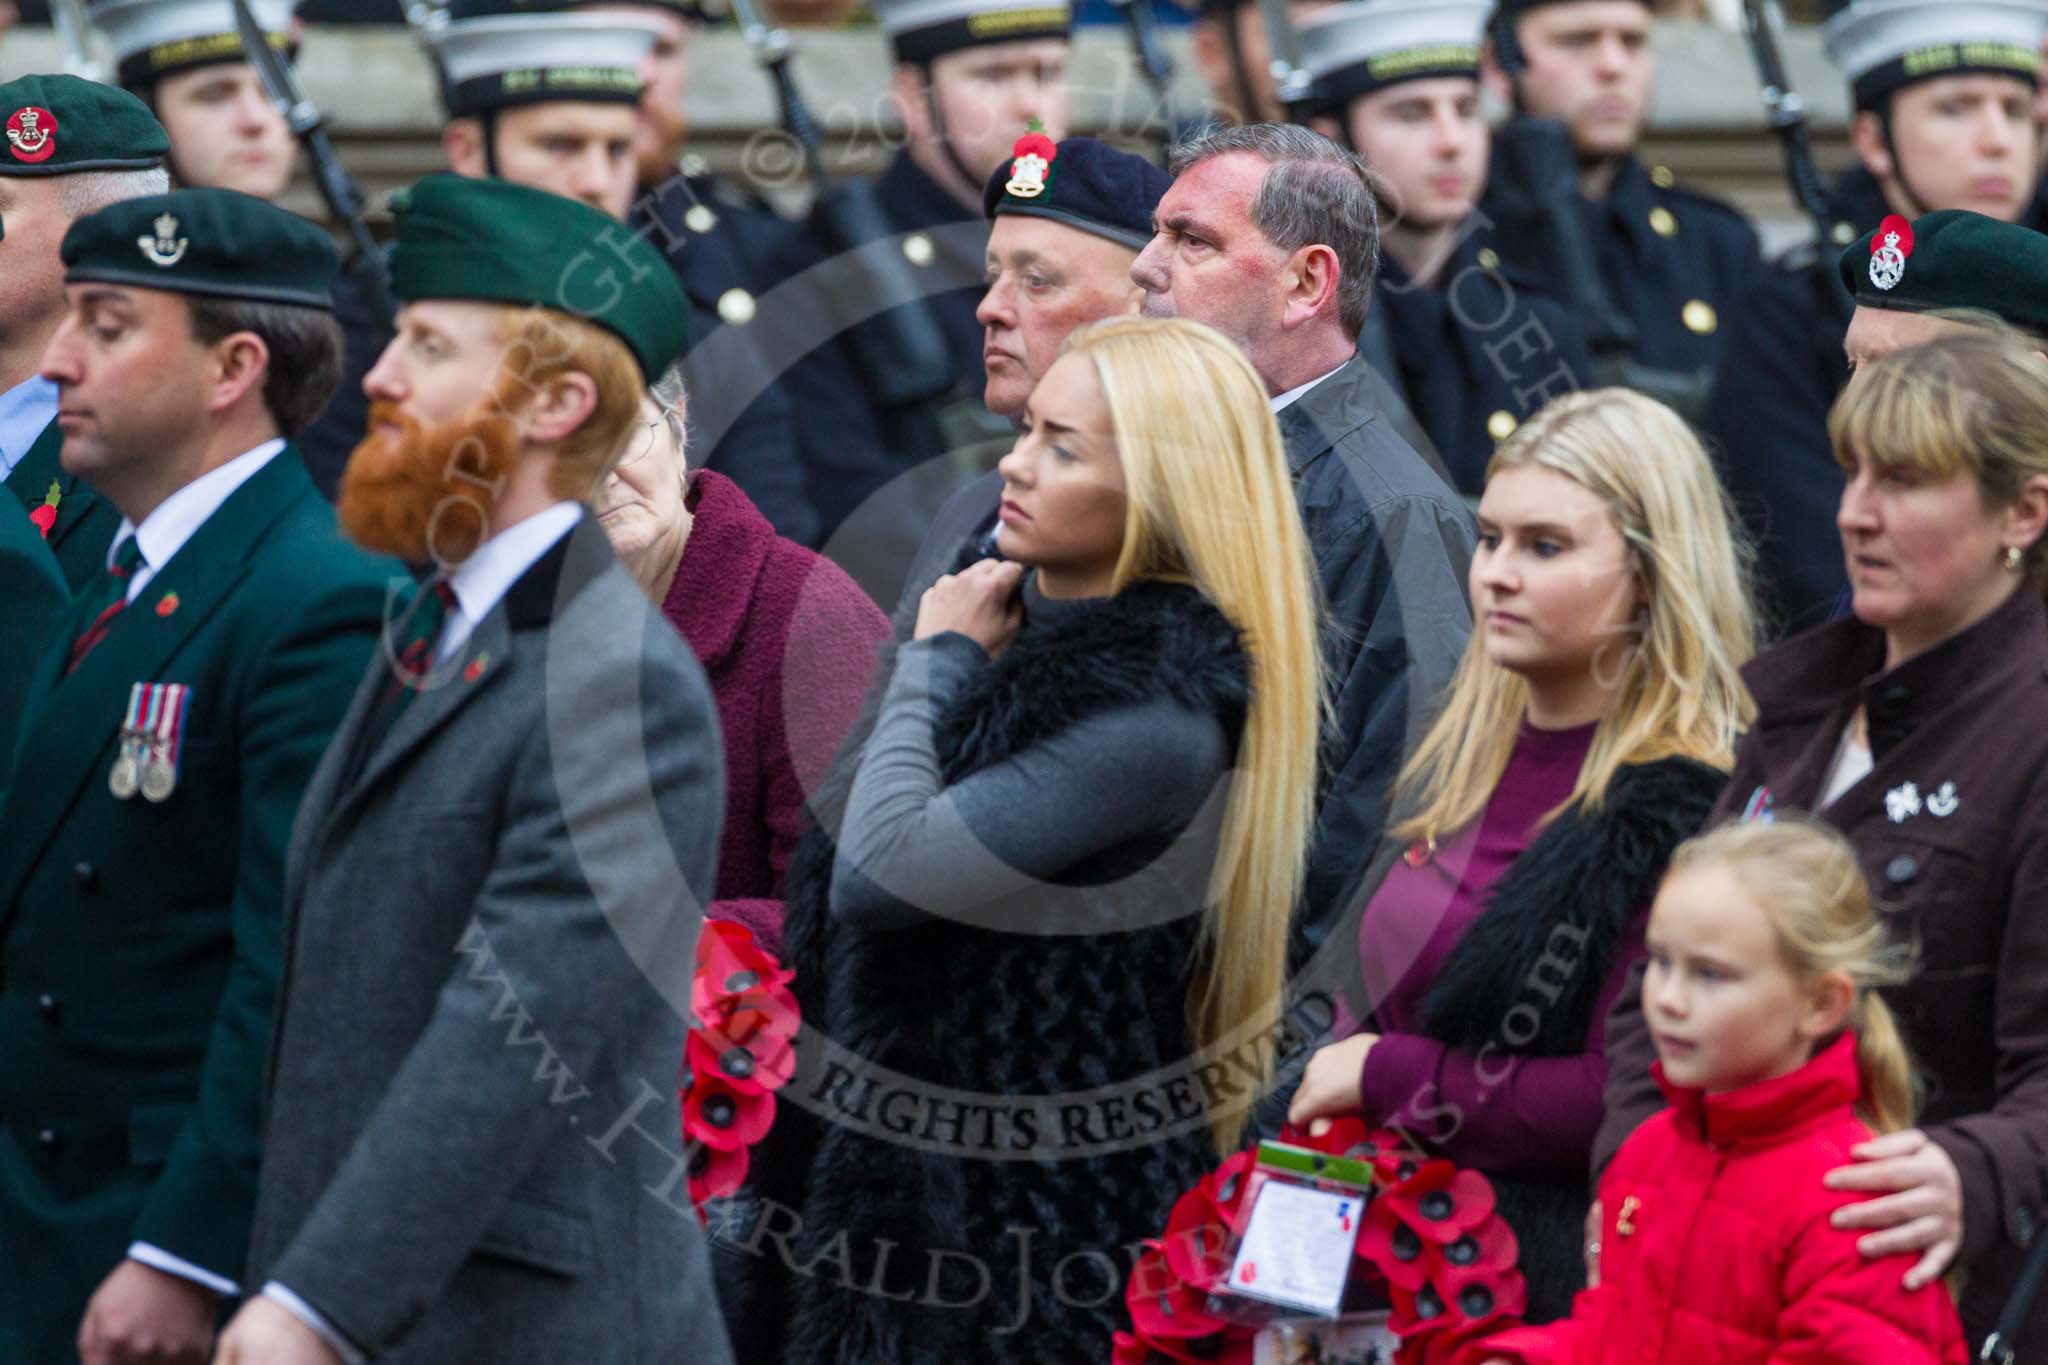 Remembrance Sunday at the Cenotaph 2015: Group A29, Rifles Regimental Association.
Cenotaph, Whitehall, London SW1,
London,
Greater London,
United Kingdom,
on 08 November 2015 at 12:13, image #1390